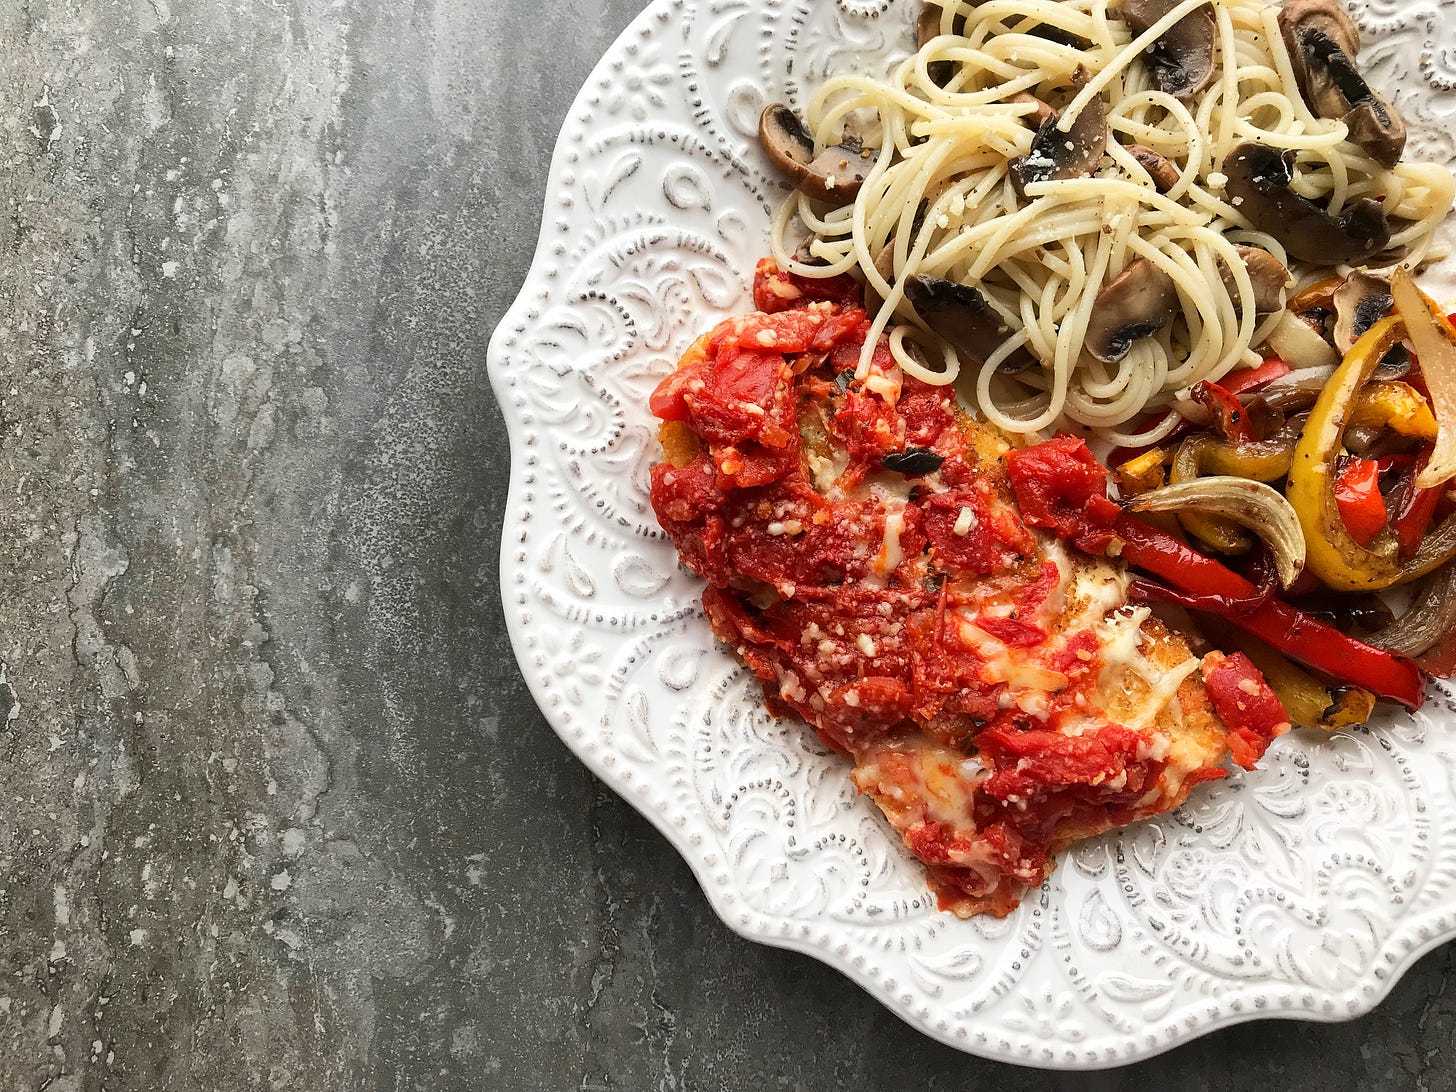 A plate of chicken parmesan with roasted peppers and pasta with mushrooms.